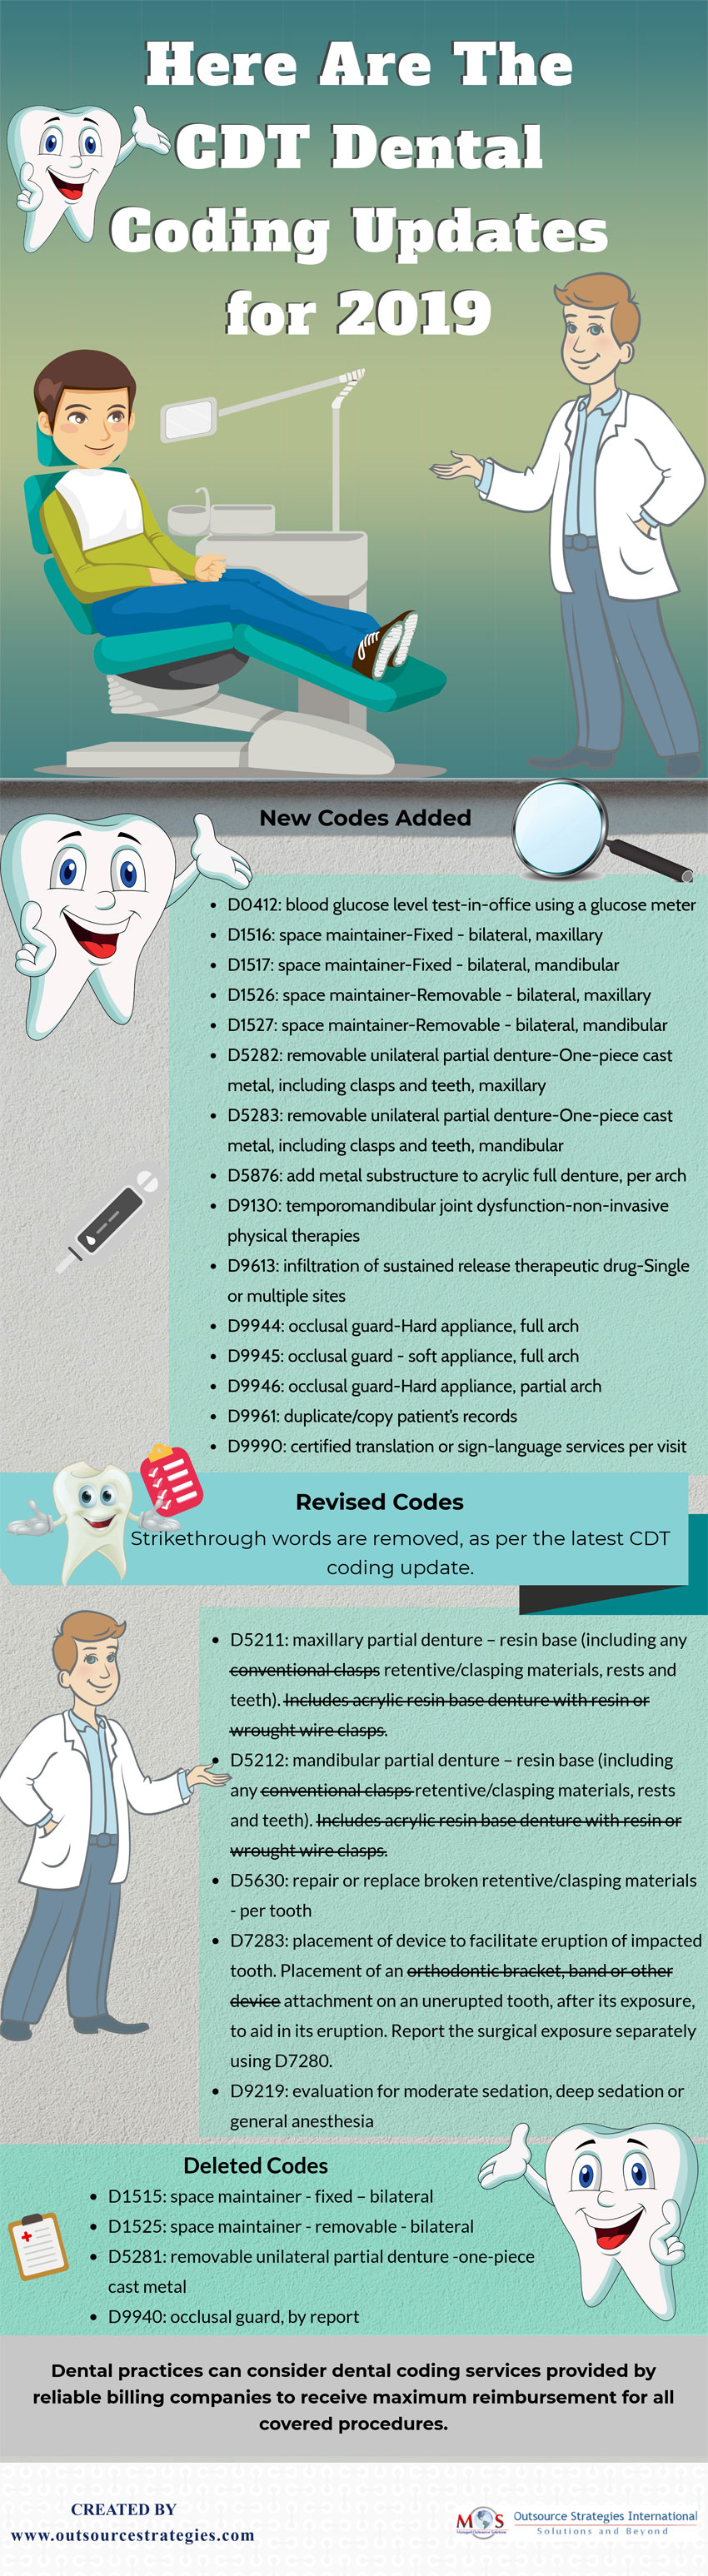 Here Are The CDT Dental Coding Updates for 2019